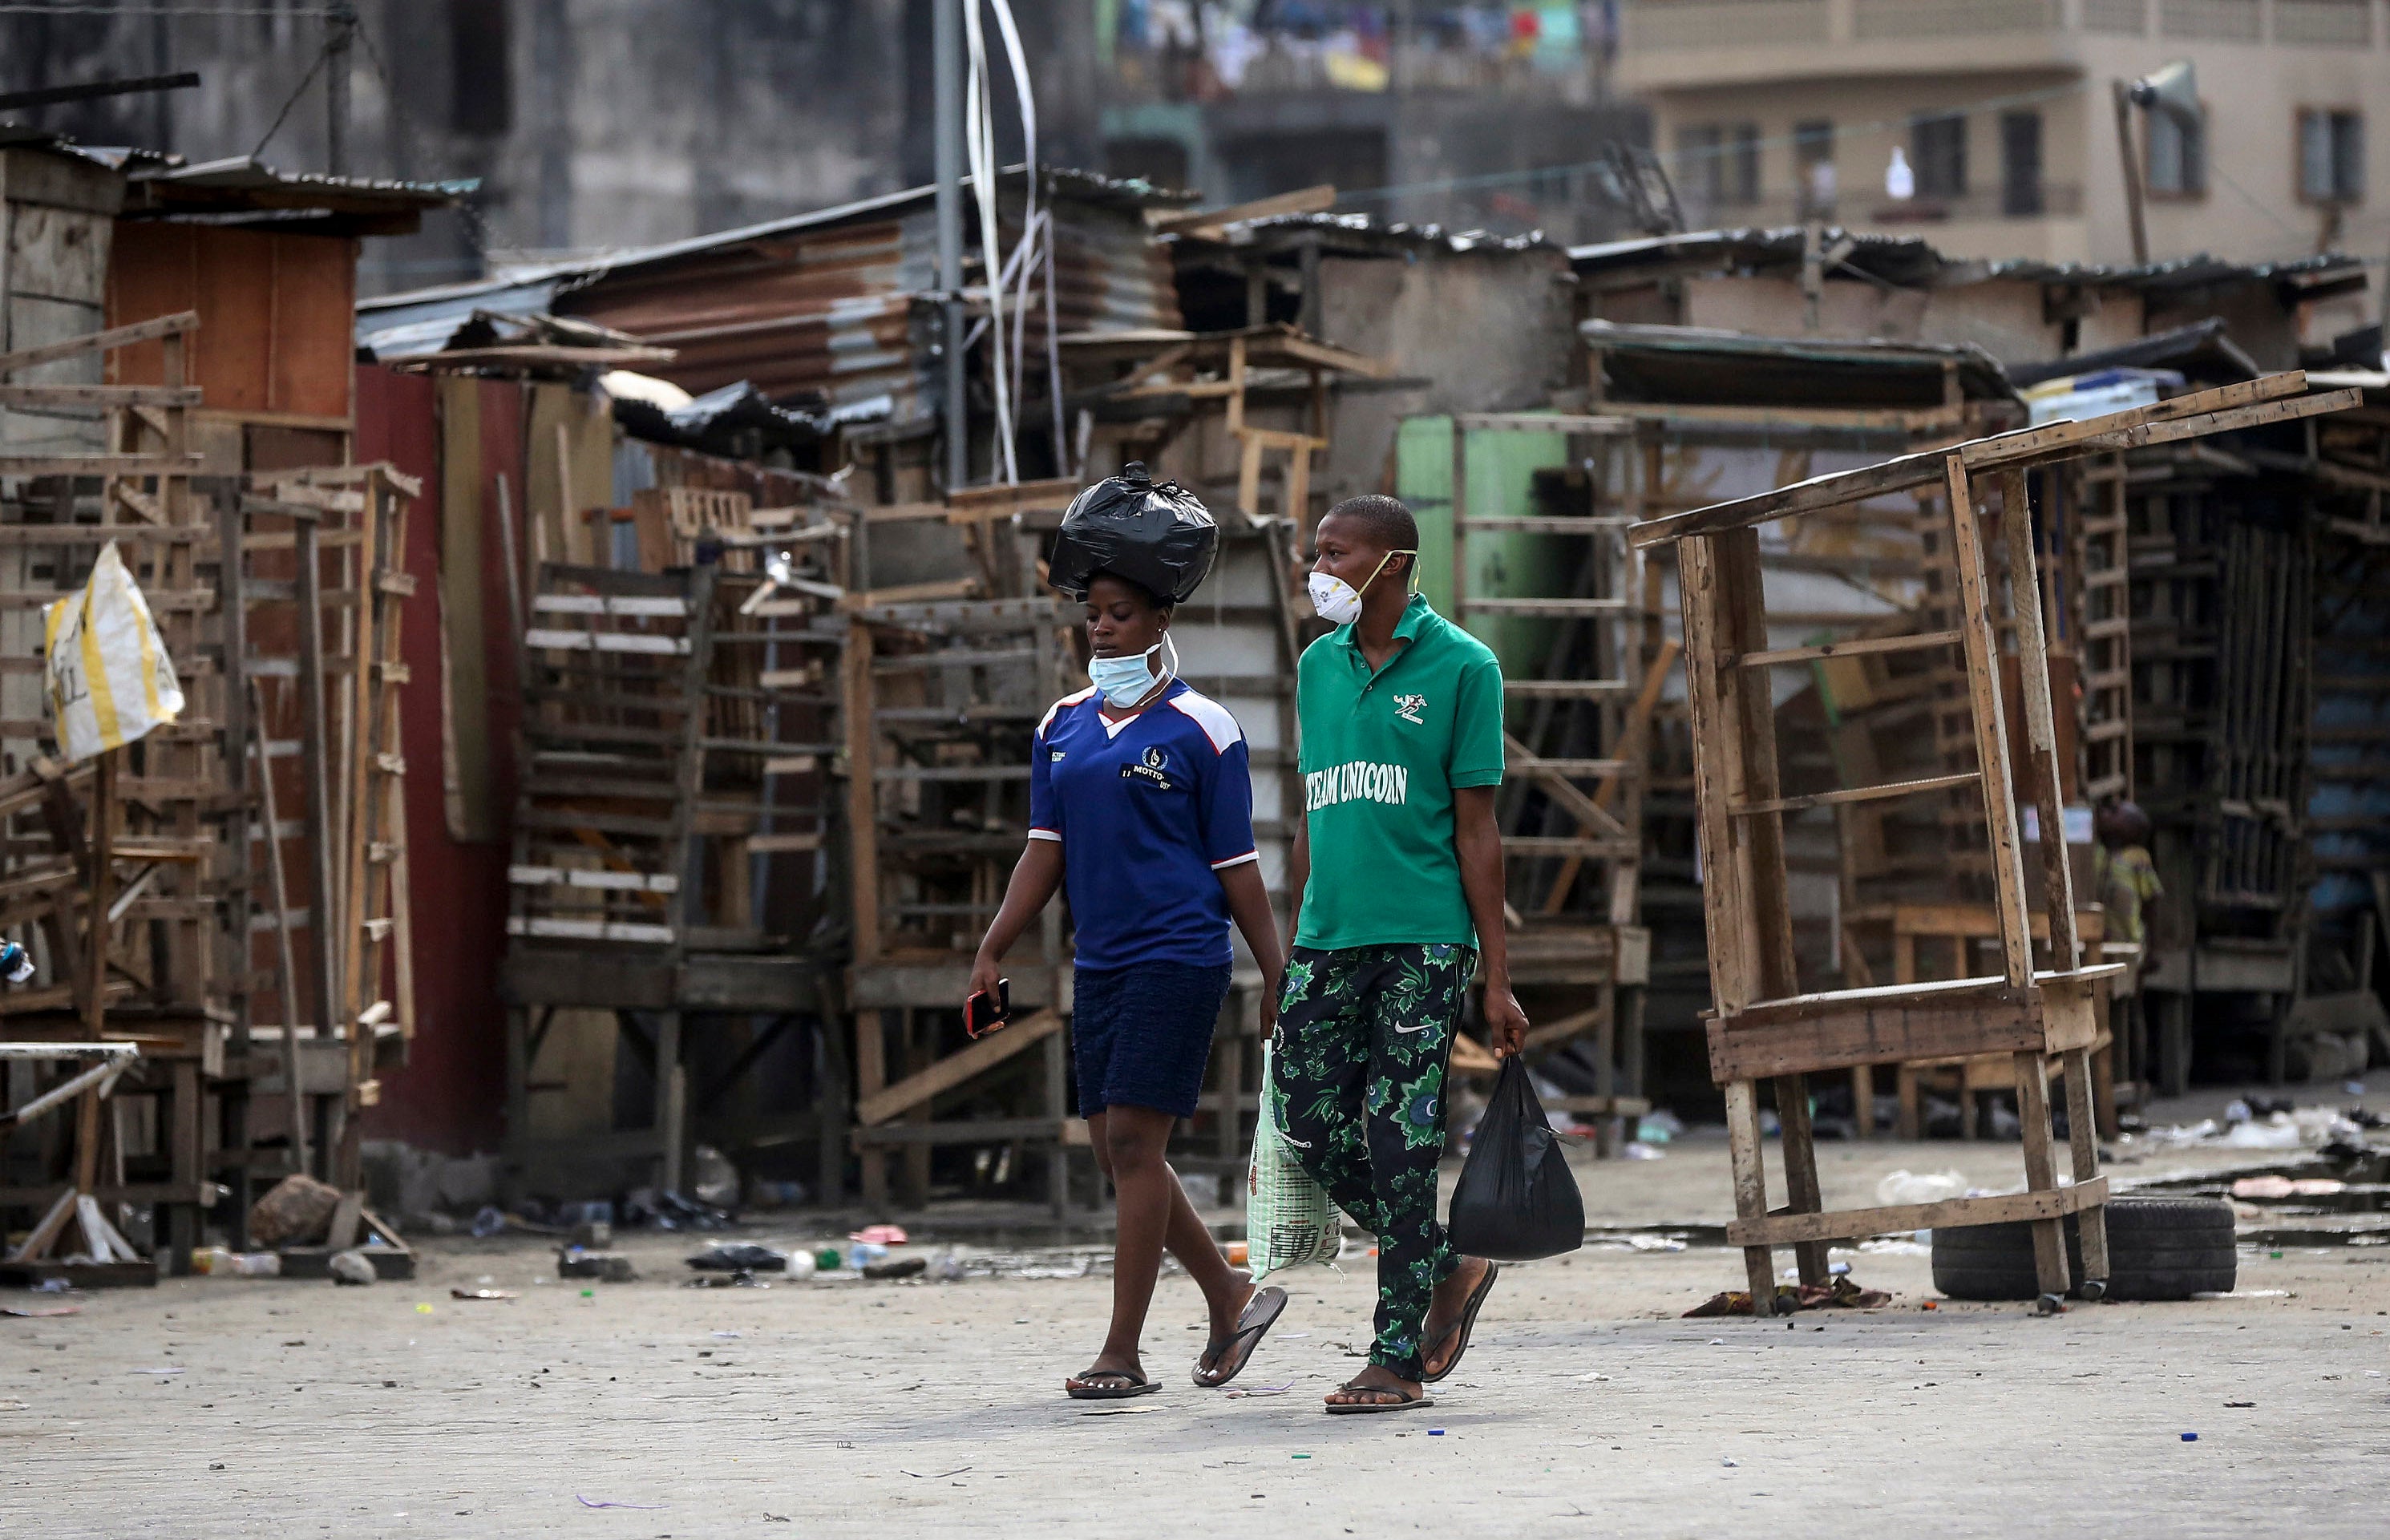 People walk past closed street stalls and shops in Lagos, Nigeria on March 26, 2020 during a government-imposed lockdown to halt the spread of COVID-19. 2020 AP Photo/Sunday Alamba.